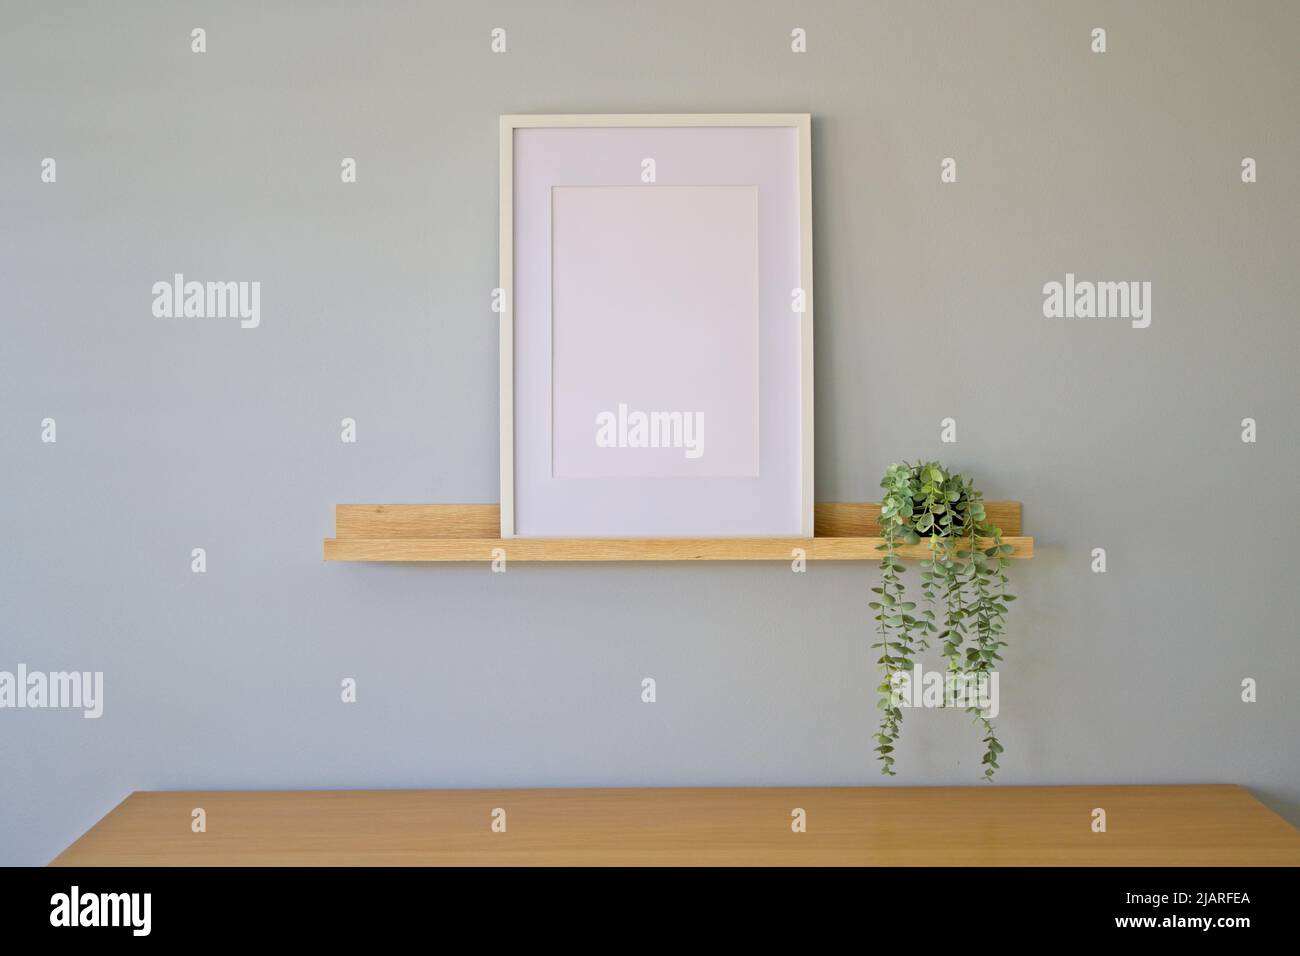 Interior frame mockup with empty frame on a wooden shelf Stock Photo